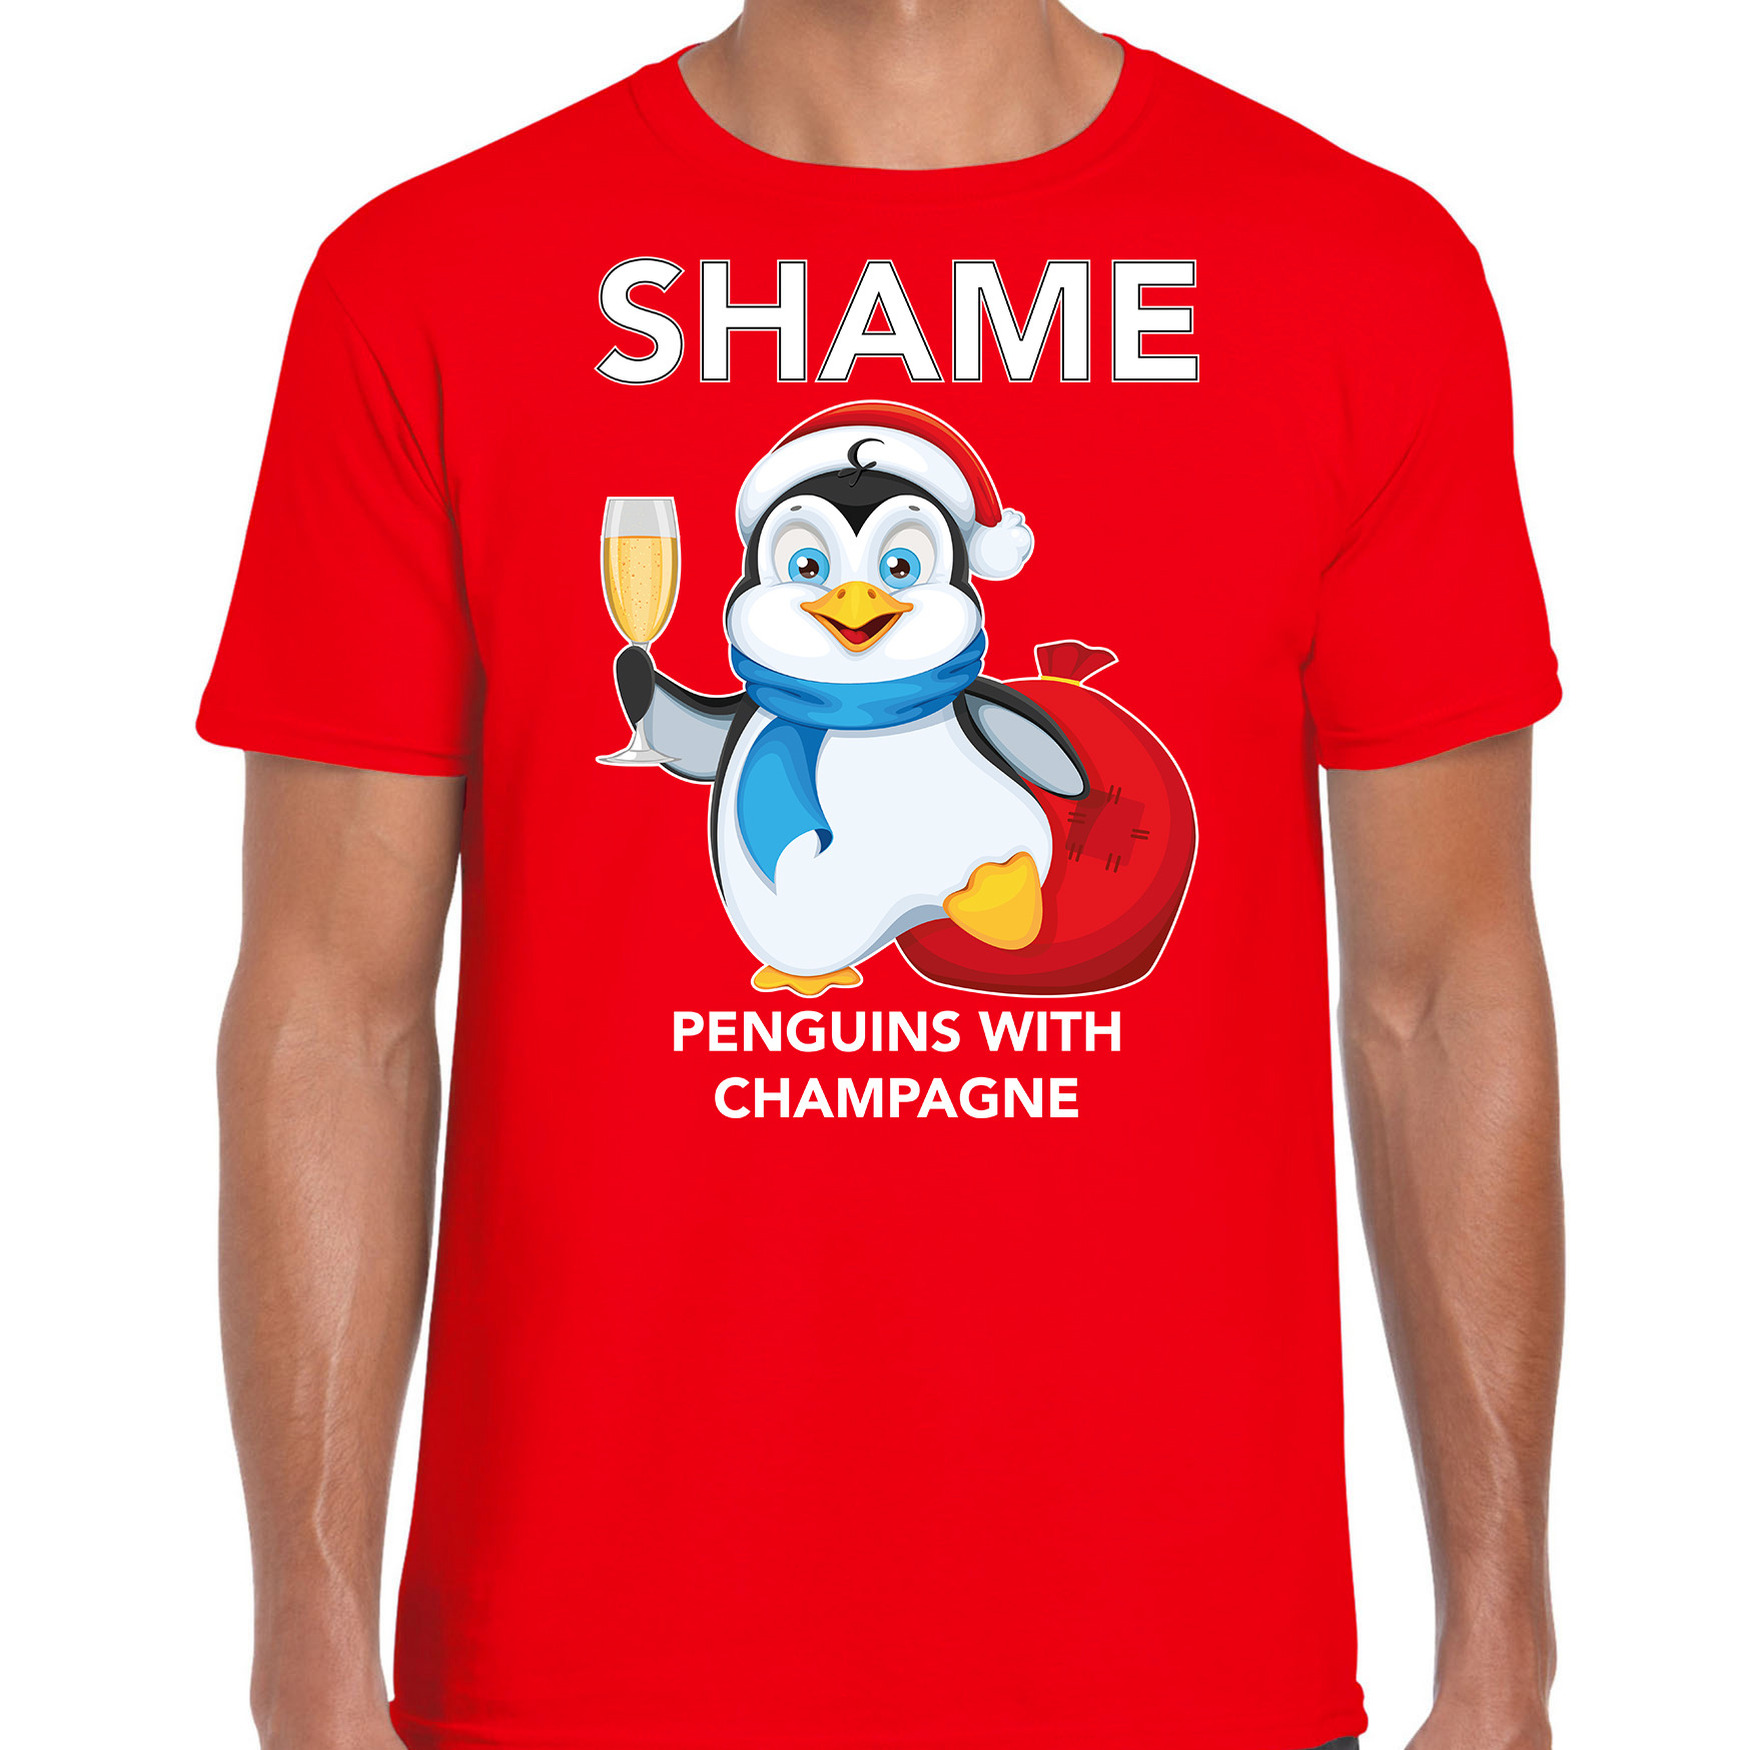 Pinguin Kerst t-shirt-outfit Shame penguins with champagne rood voor heren